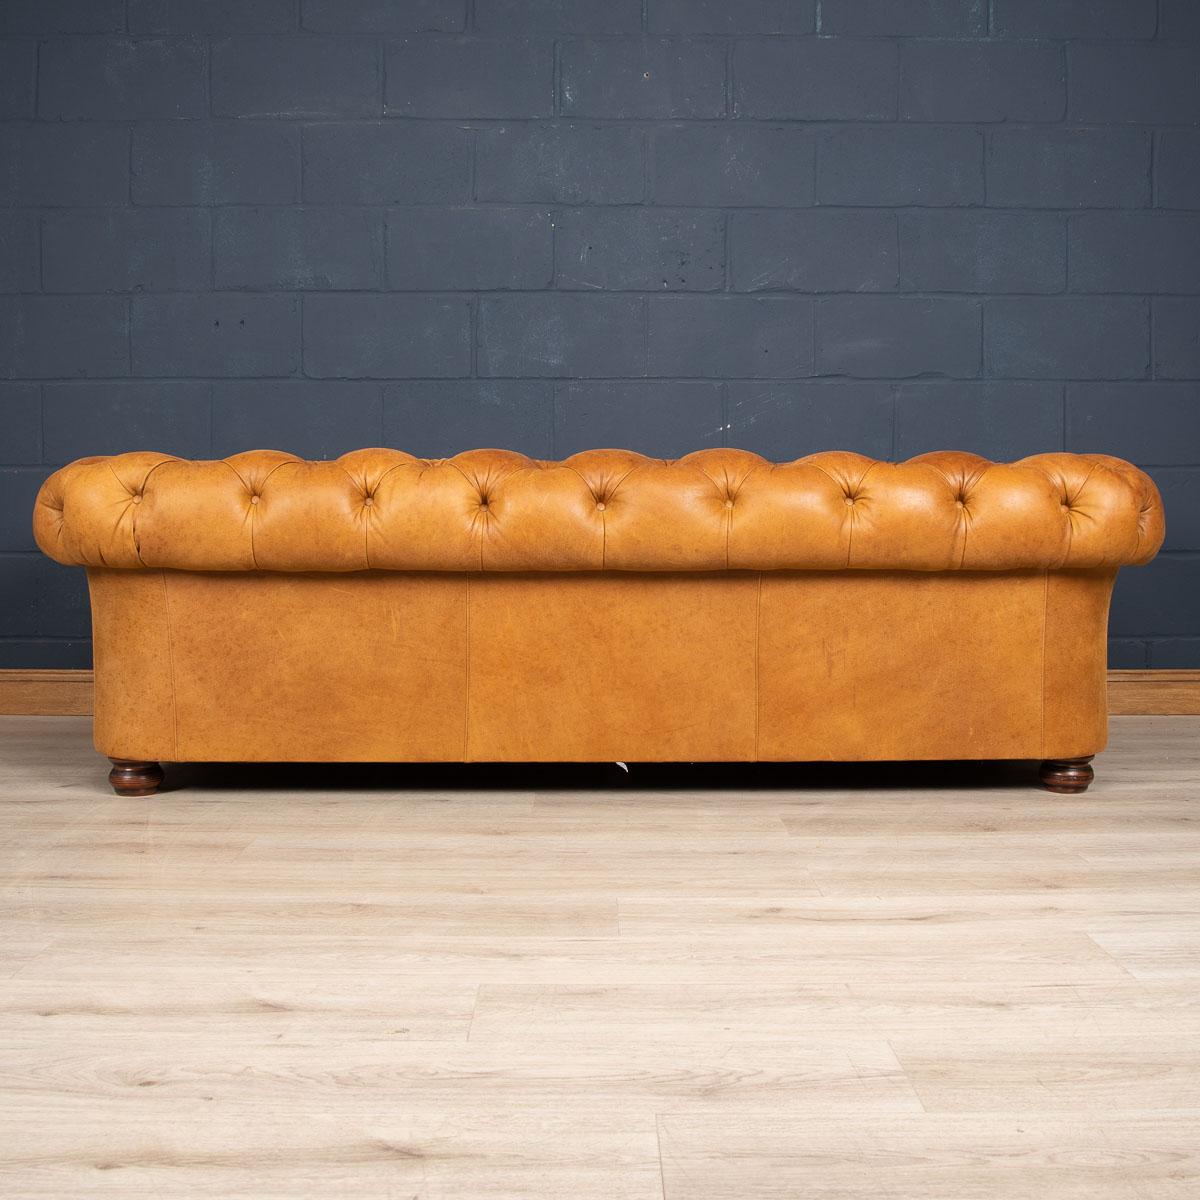 European Late 20th Century 3-Seat Chesterfield Leather Sofa with Button Down Seat